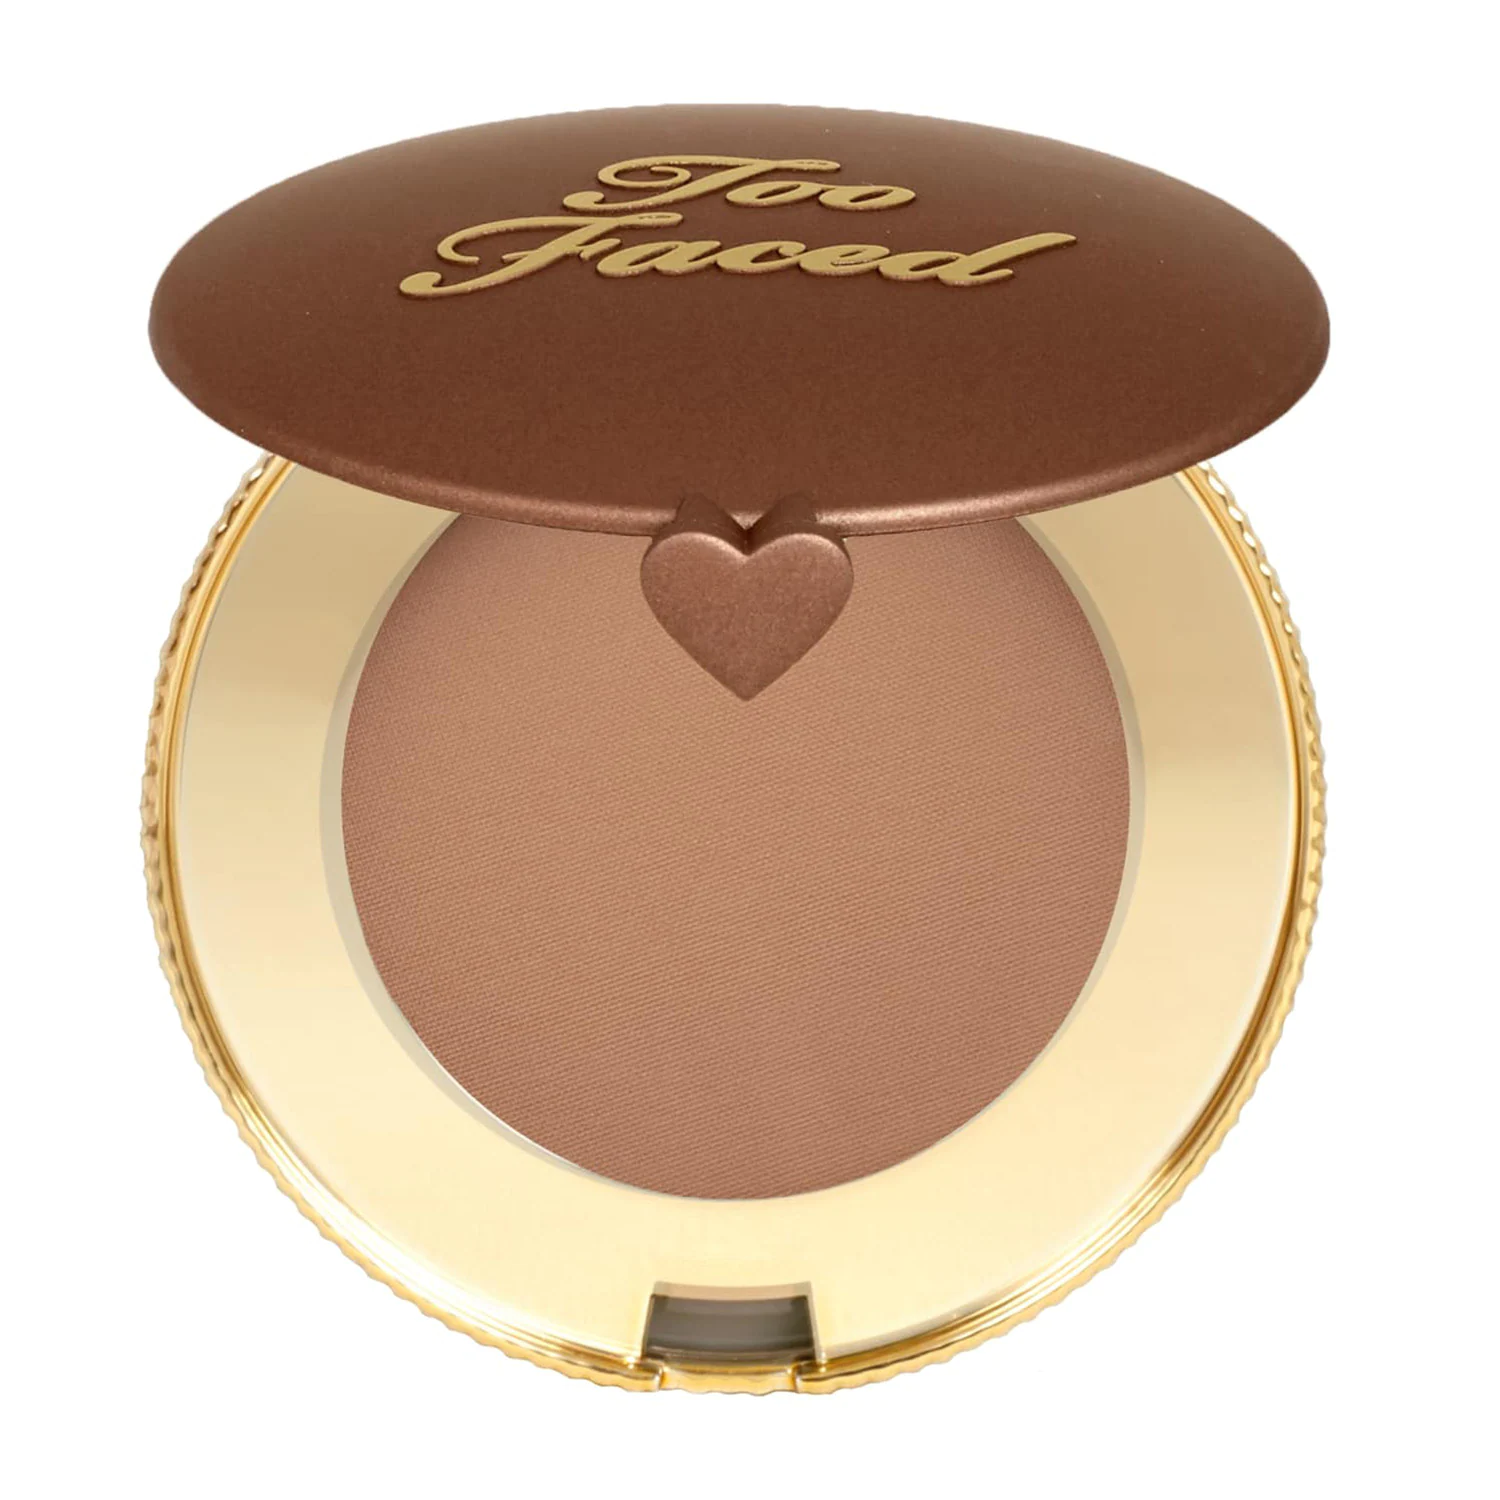 Chocolate Soleil Bronzer Deluxe Too Face